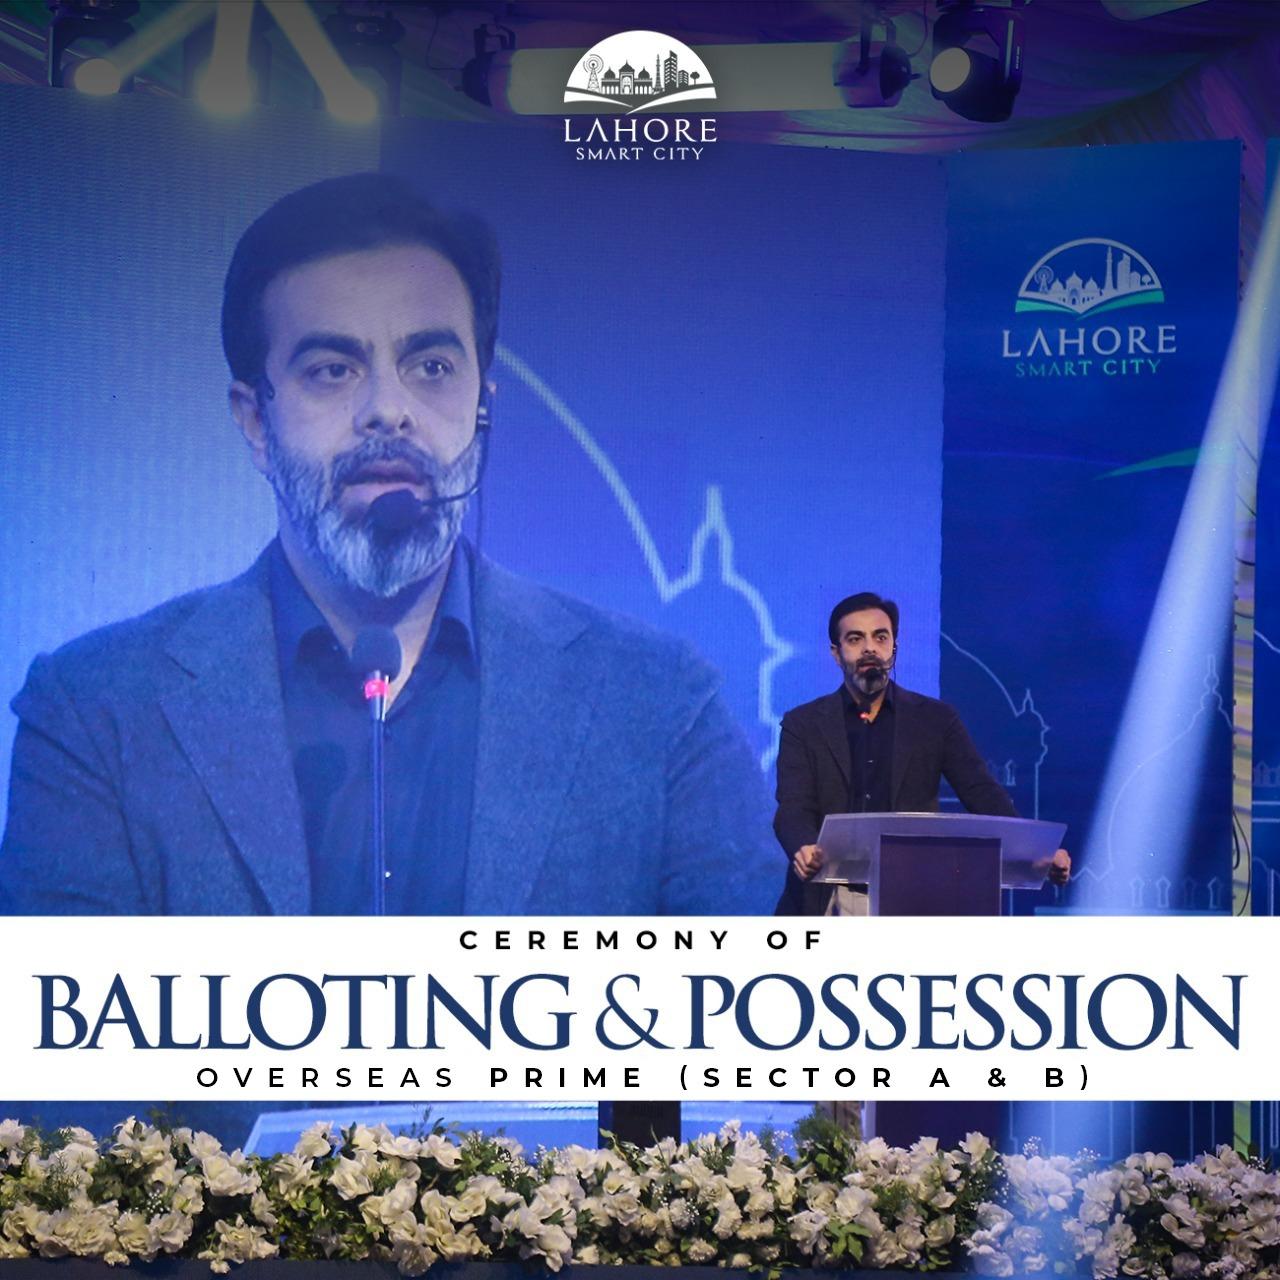 Ceremony of Balloting & Possession Overseas Prime (Sector A & B)